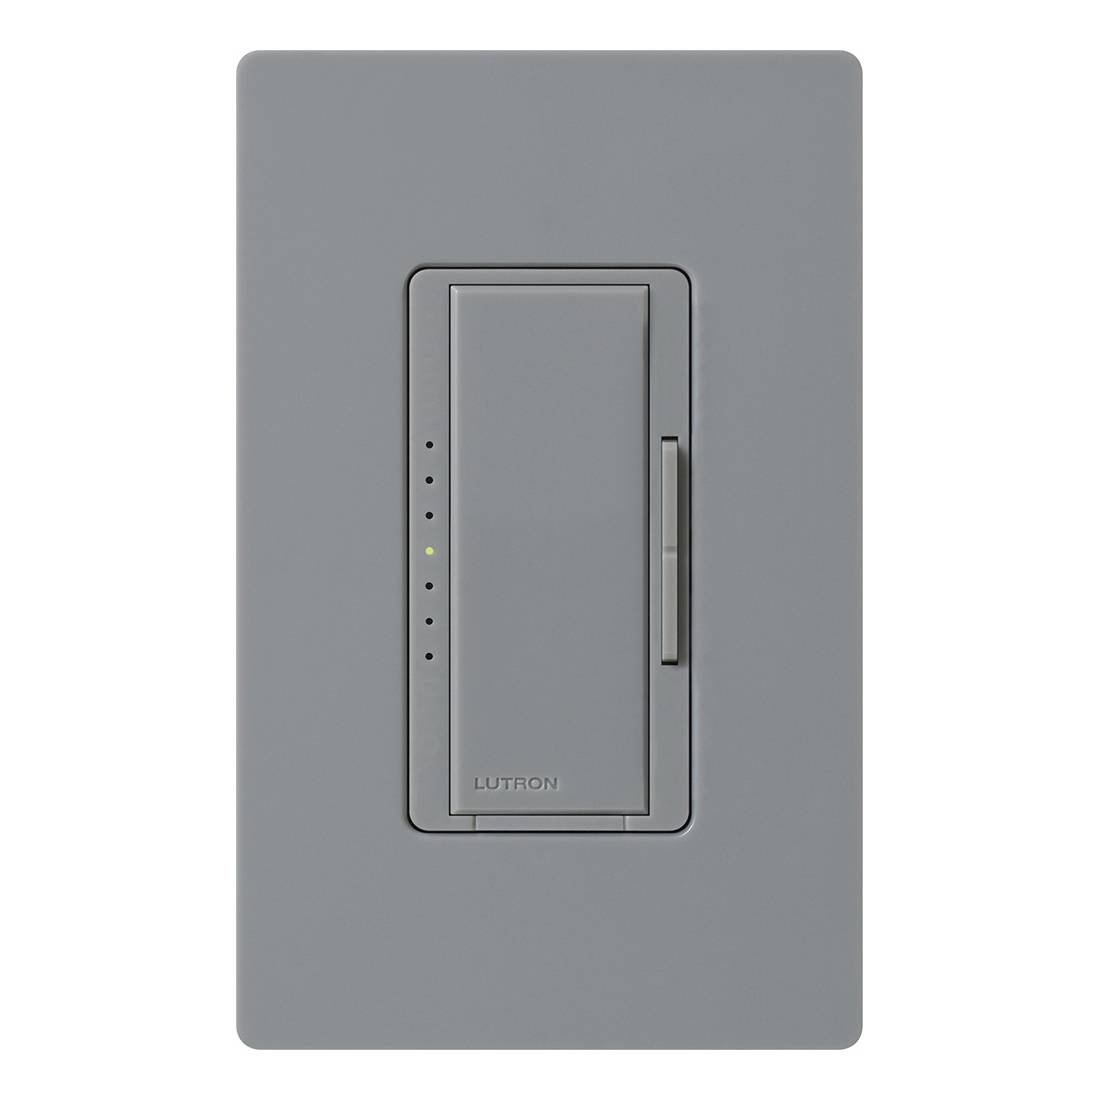 Lutron® Maestro® C.L® MACL-153M-IV 3-Way Designer Style Multi-Location Dimmer Switch, 120 VAC, 1.25 A, 1 Poles, On/Off Operation, Ivory